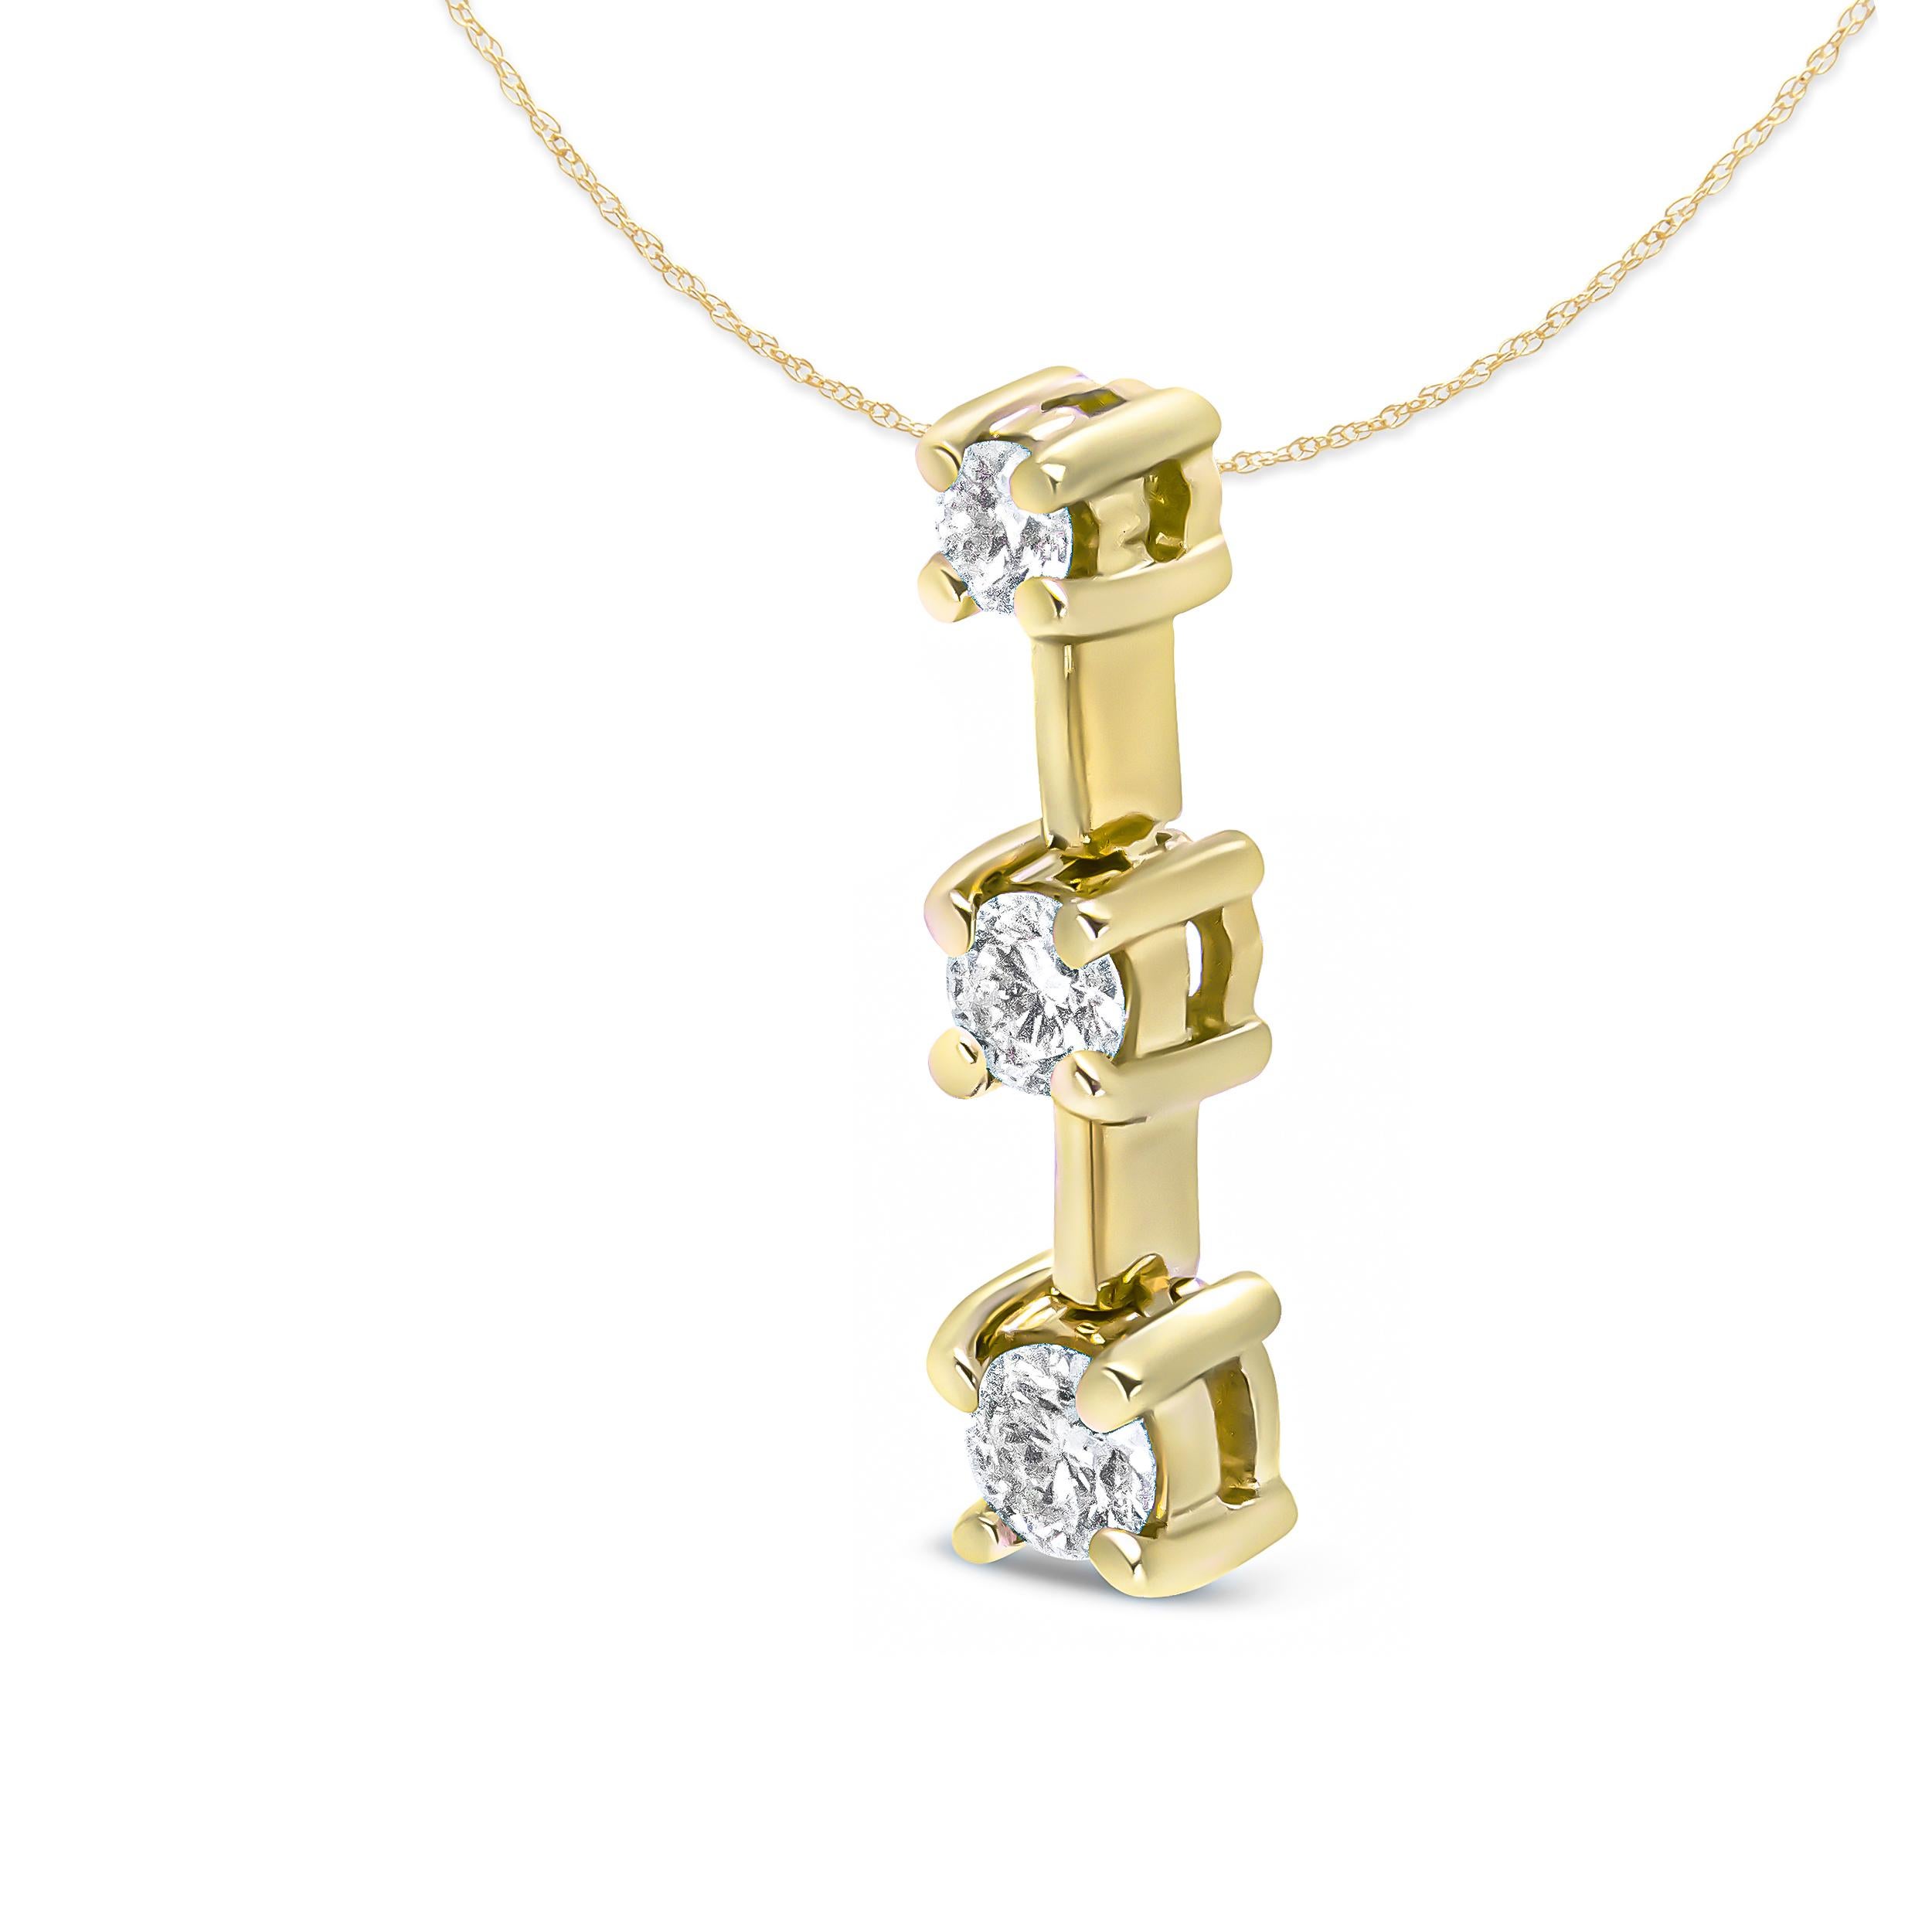 This three stone drop journey pendant necklace is a symbolic piece representing your past, present, and future. Three round diamonds in prong settings cascade downward in gradual sizes, with the diamonds totaling 3/4 cttw and an approximate H-I